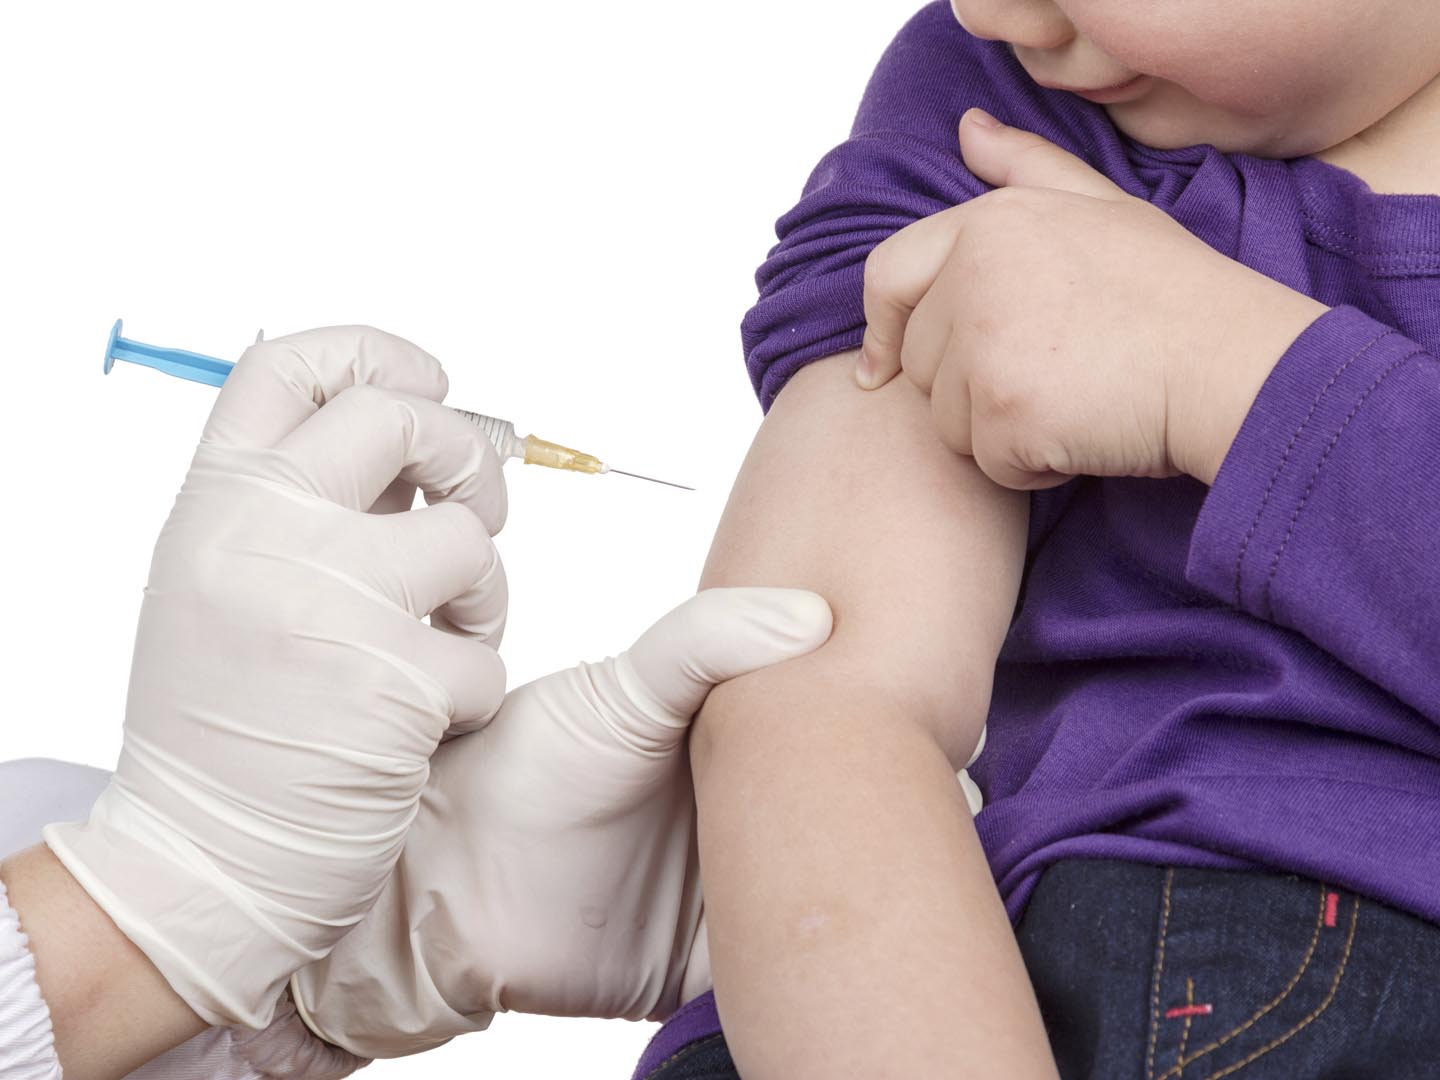 The doctor gave children vaccination needle